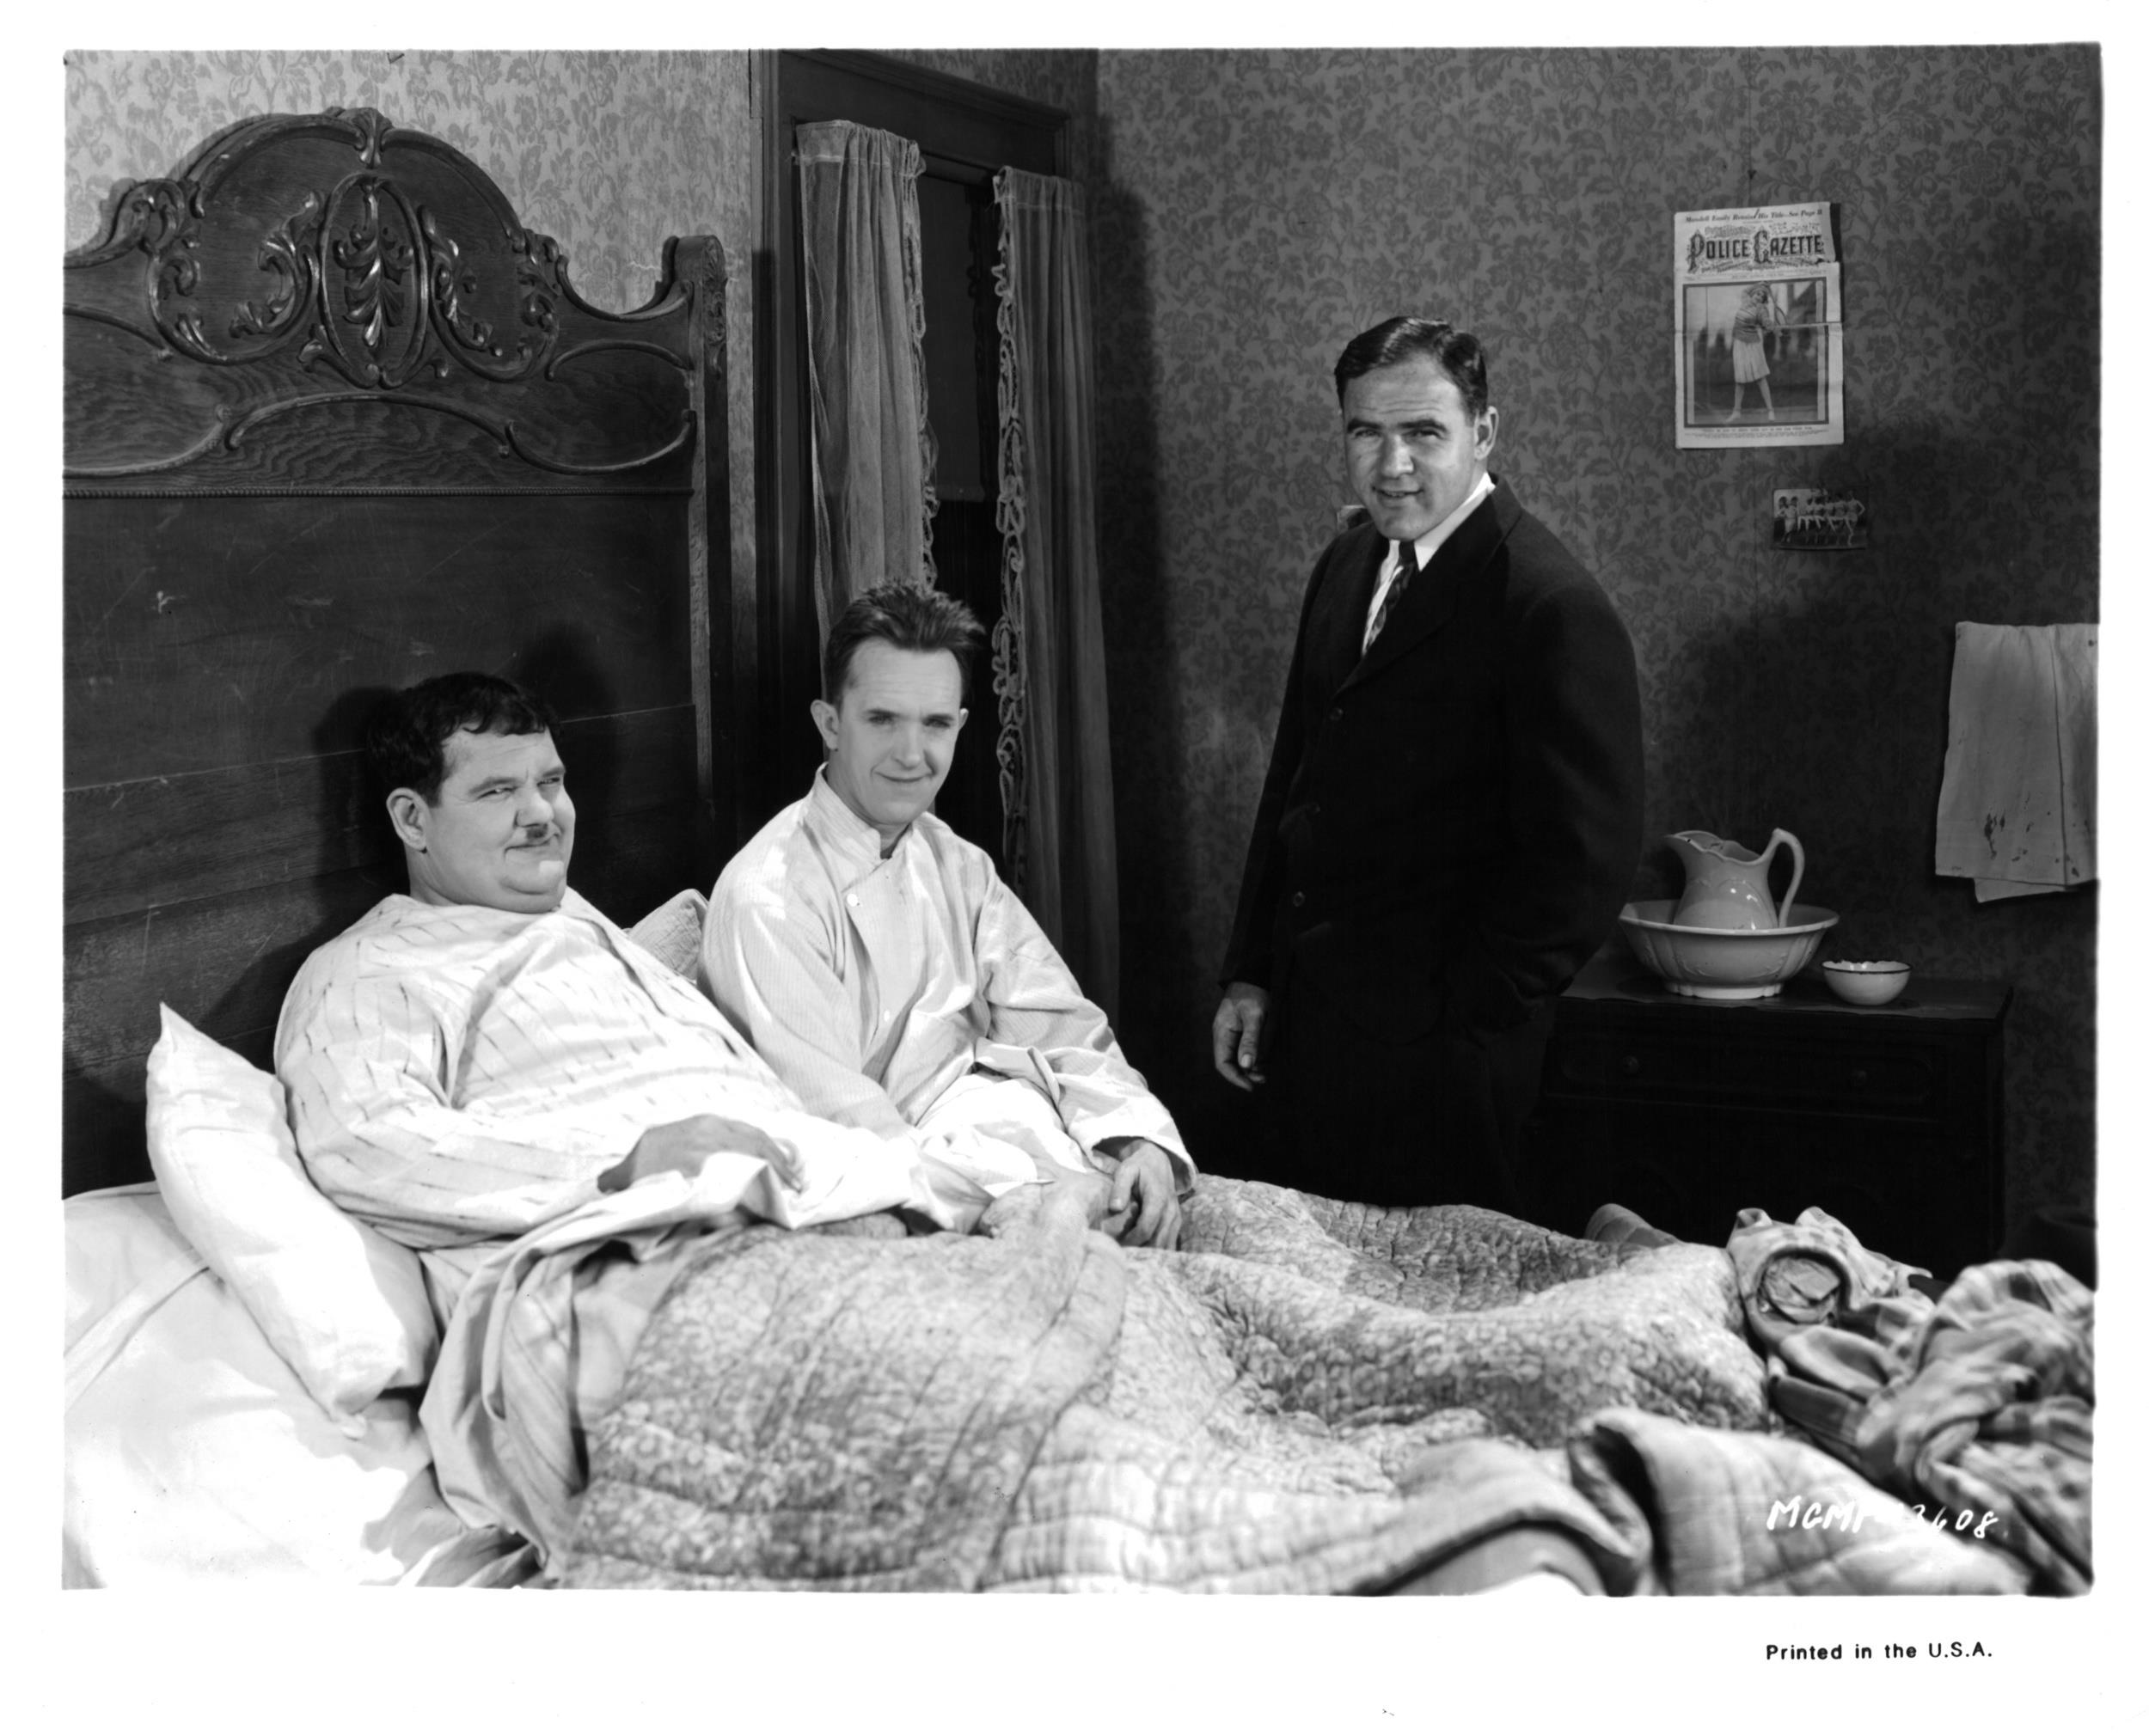 <p>Roach had his own studio and made the most of it. Sure, the "Our Gang” shorts feel a little hokey now, but he was making them in the early days of film. He also played a key role in the career of Laurel and Hardy. Early film comedy owes a lot to Roach.</p>